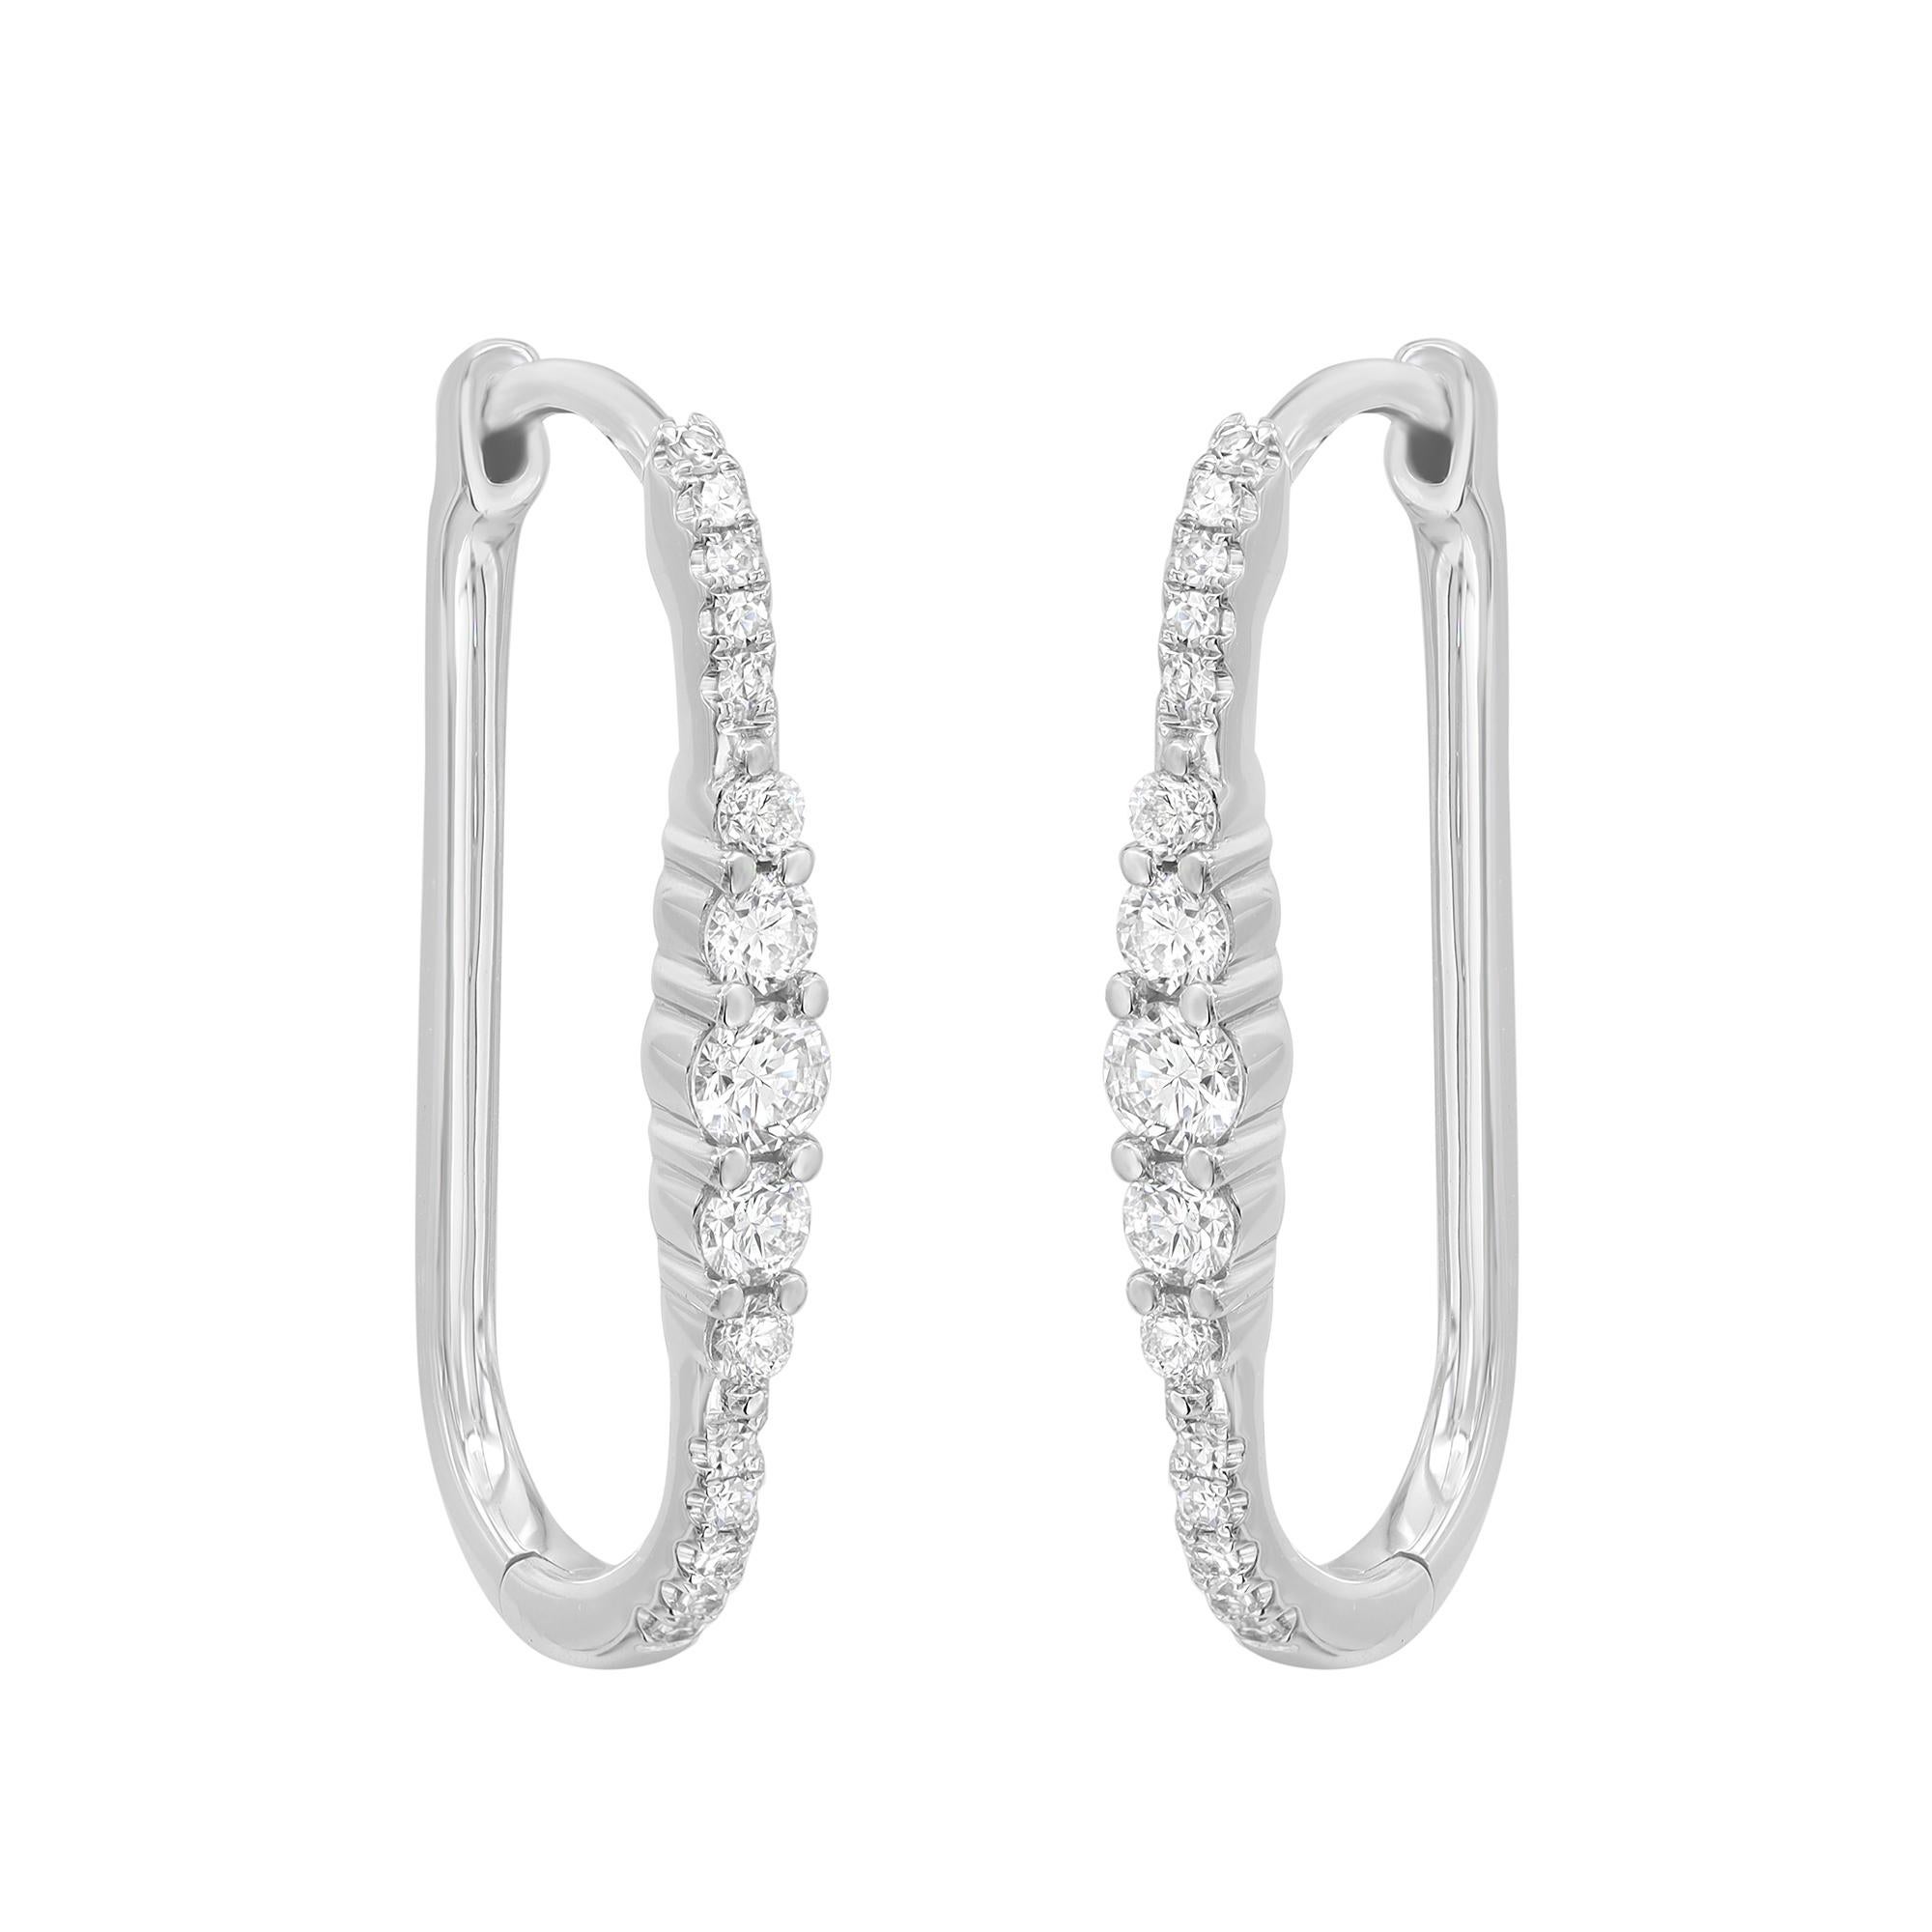 Classic and trendy, these finely crafted oval hoop earrings could never go wrong for your everyday wear. Made in high polished 14K white gold, these earrings feature bright white round cut diamonds weighing 0.29 carat. Diamond color G-H and clarity